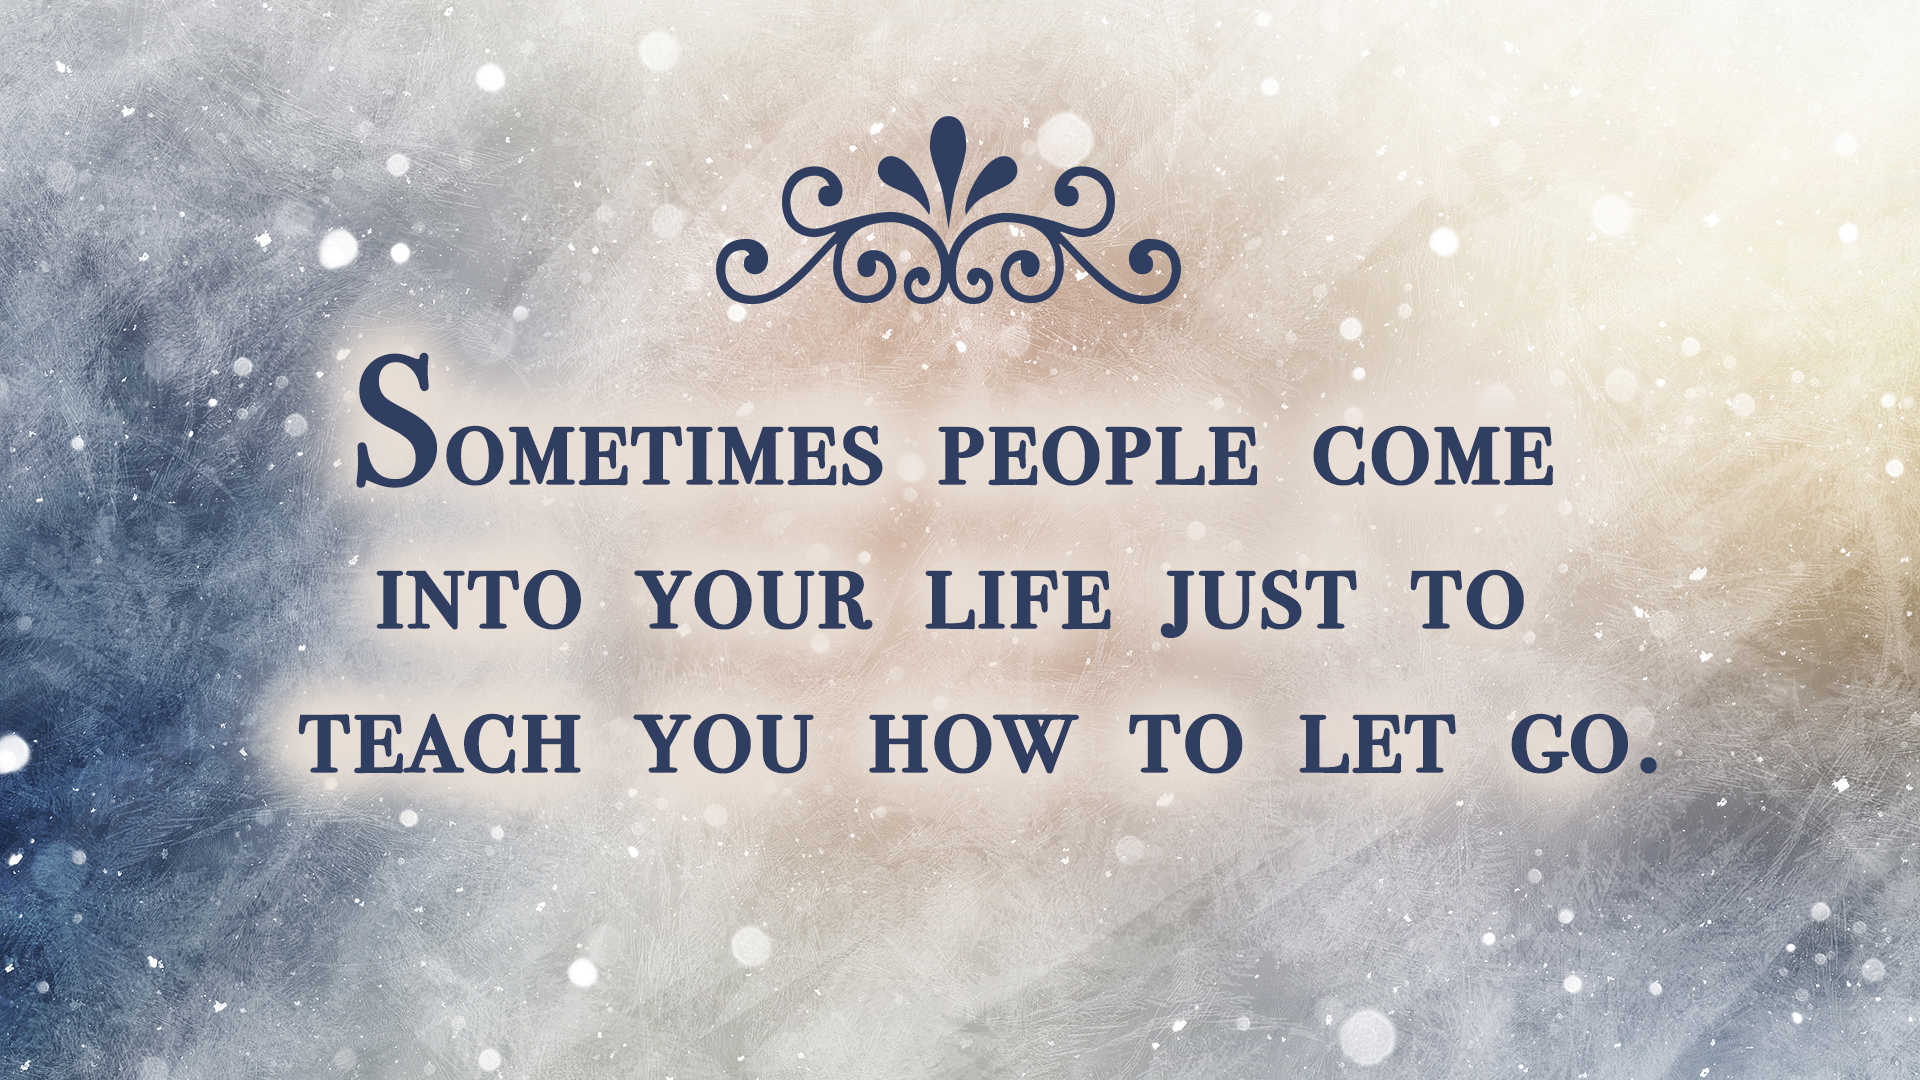 sometimes people come into your life just to teach you how to let go - Letting Go Quotes